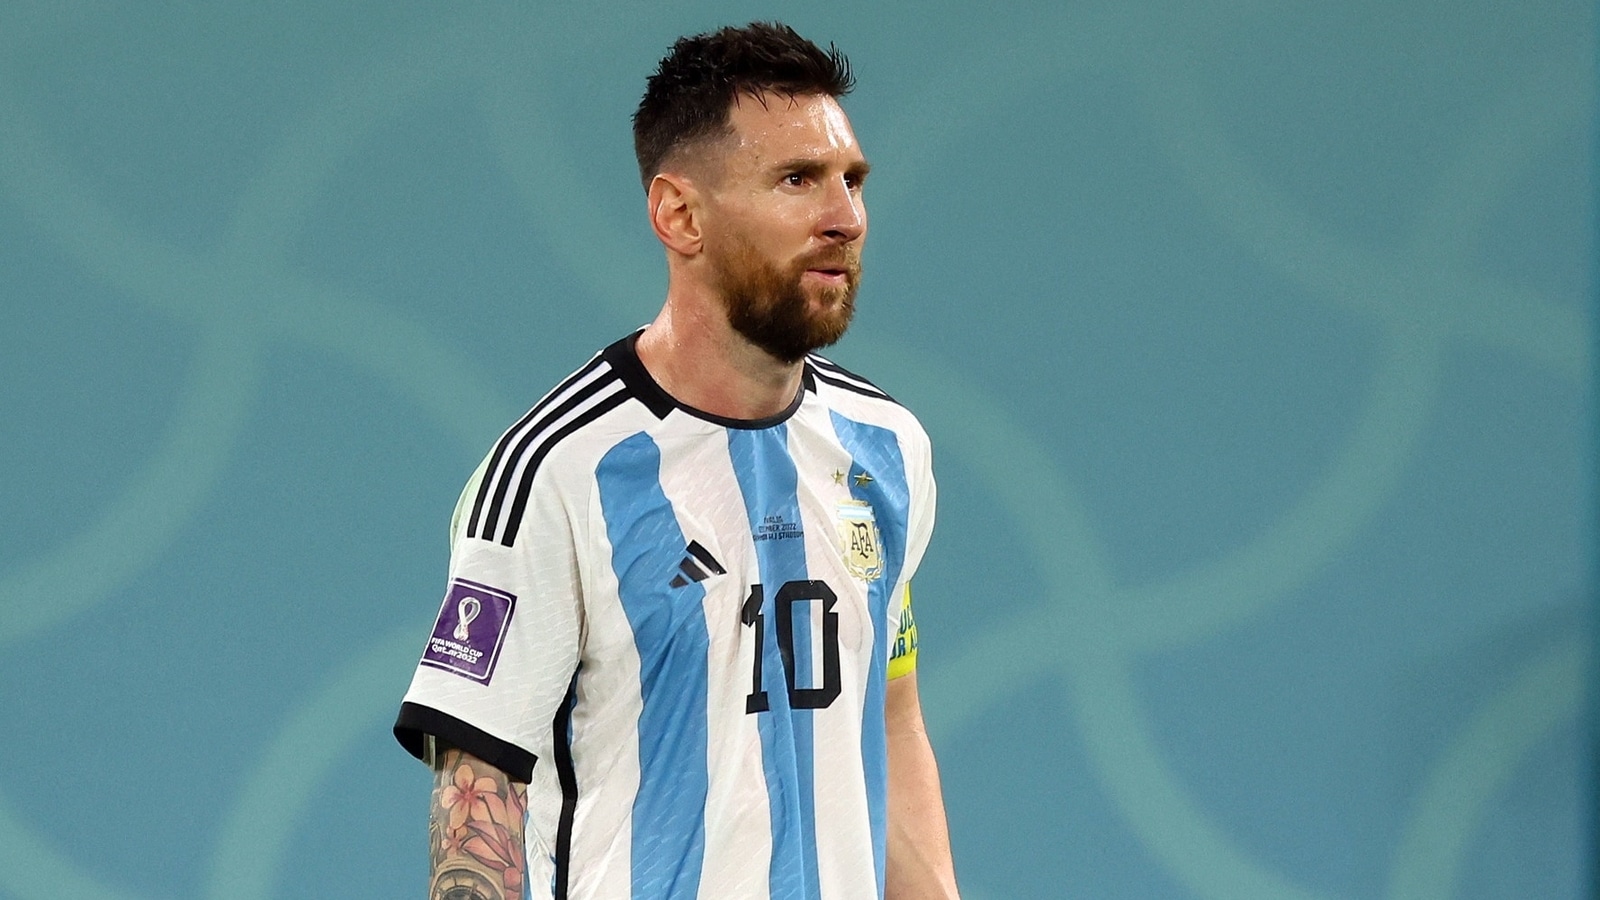 ‘Forgive us…’: Why Messi apologised to locals in hometown Rosario after Argentina’s FIFA World Cup win